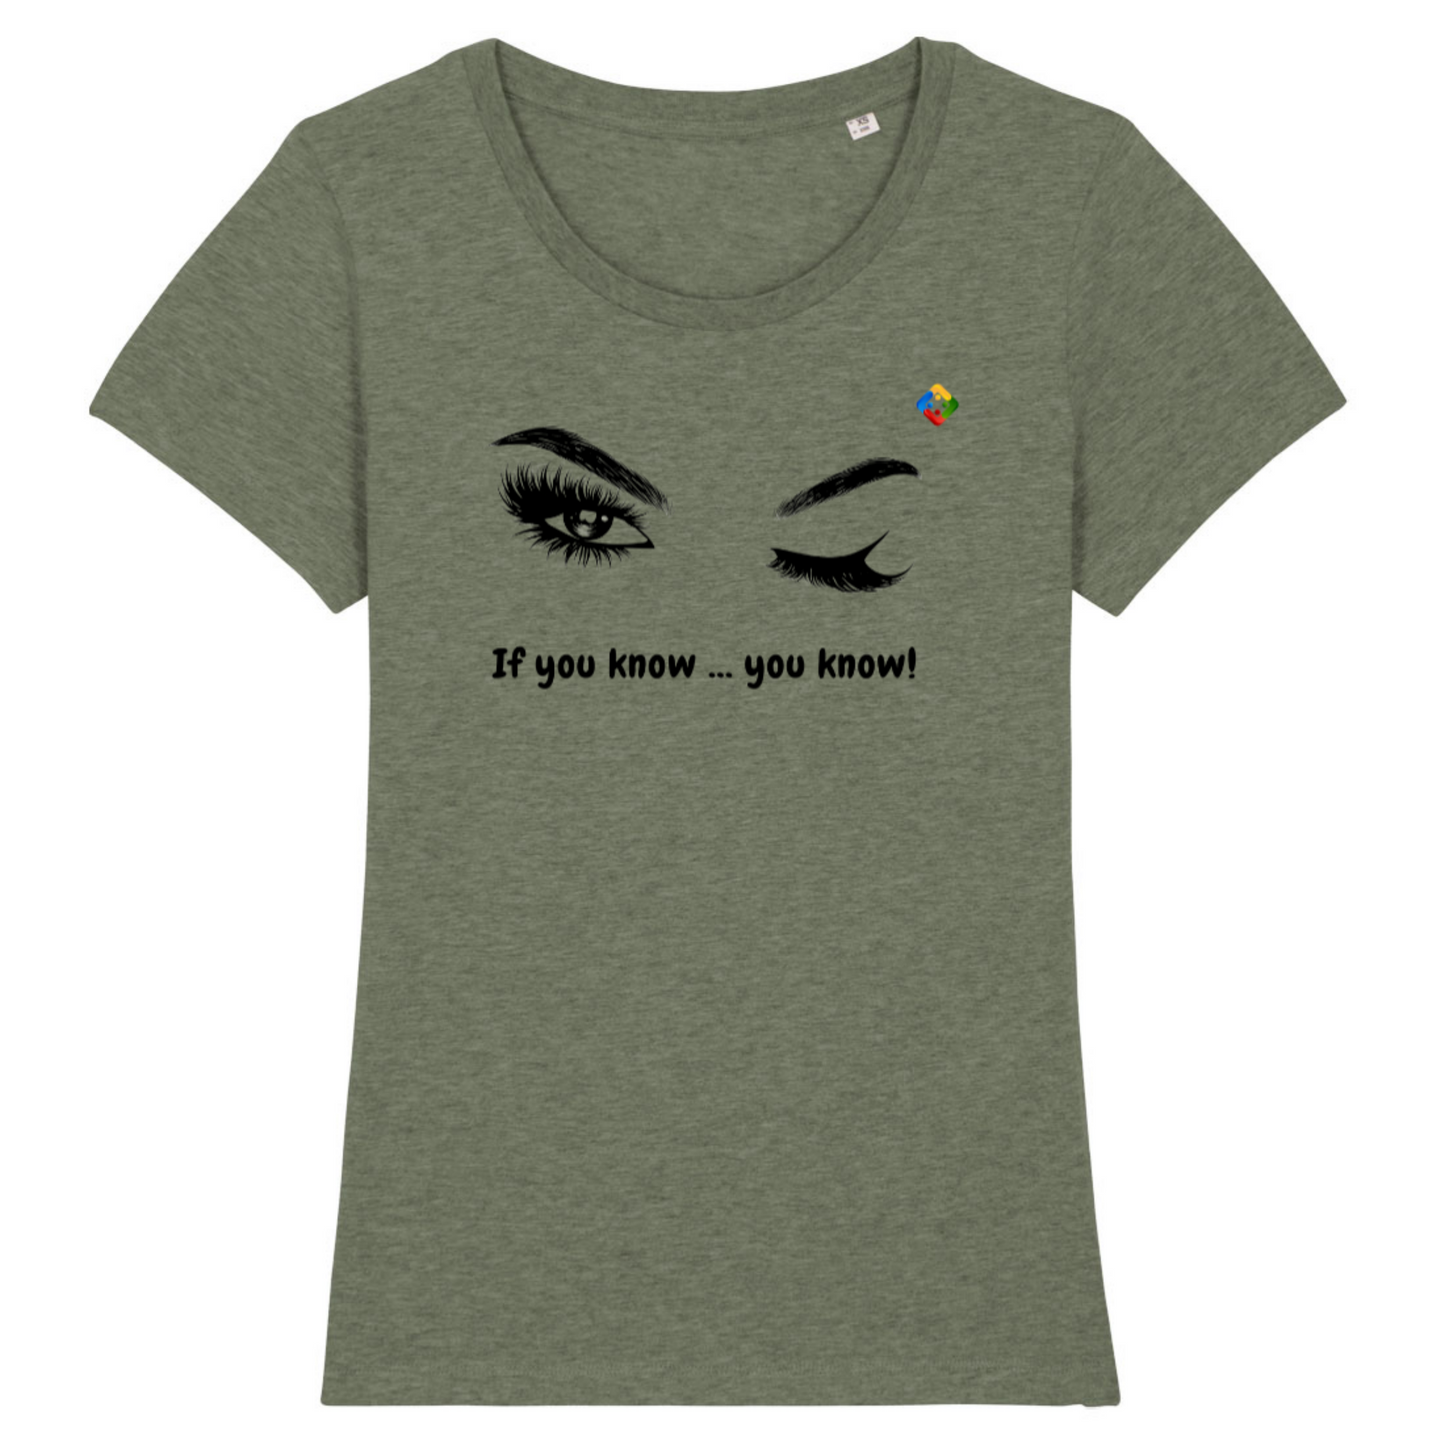 Women's organic T-shirt with 'If you know' design.  Available in 8 colours.